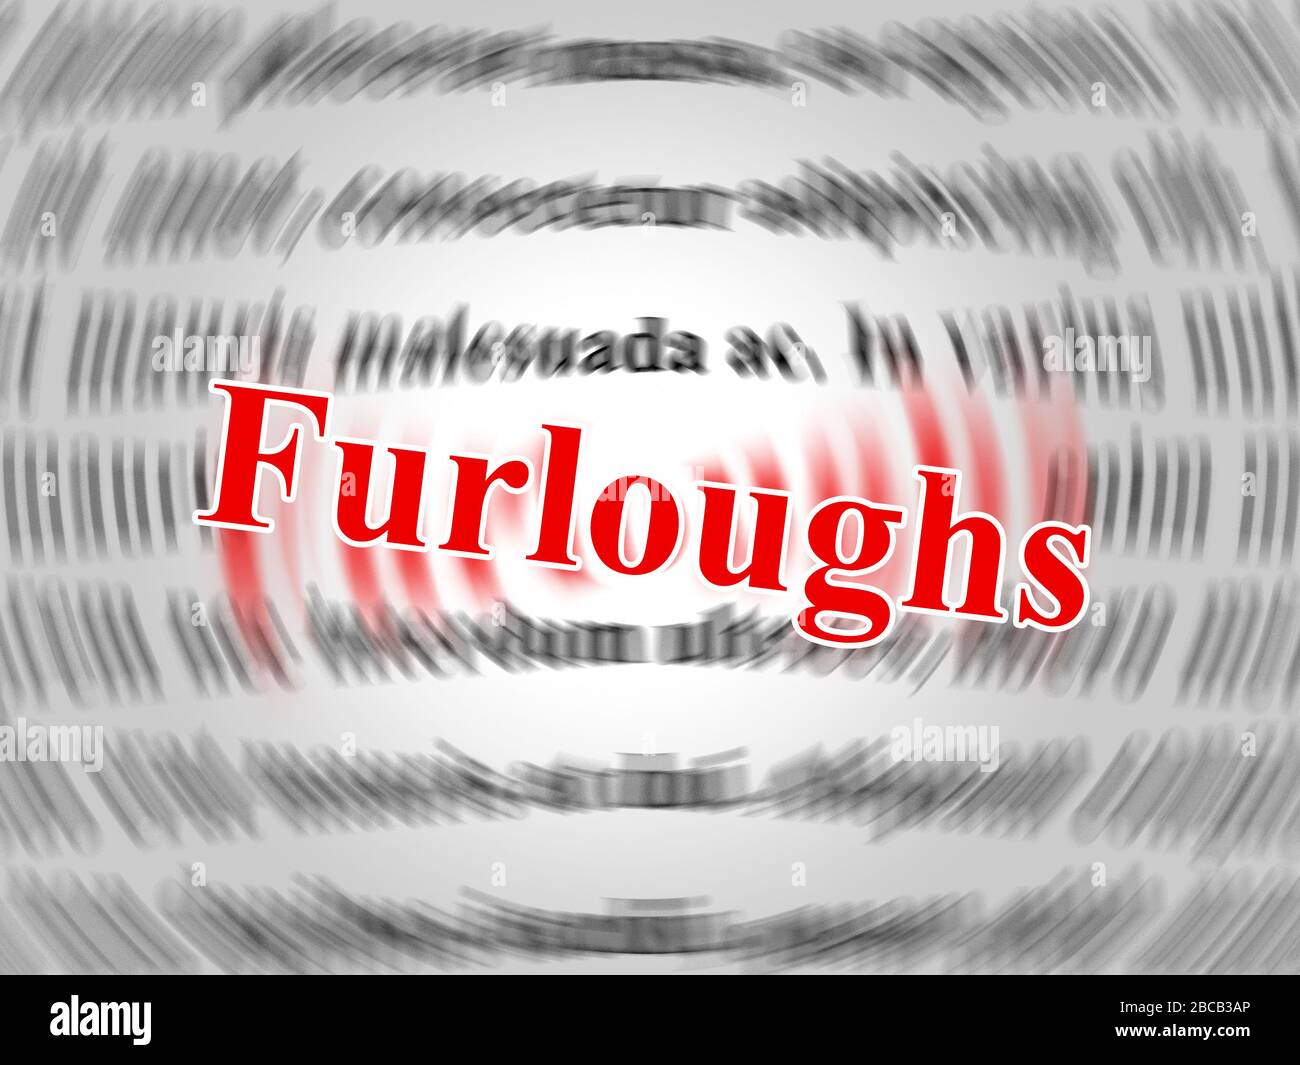 Furloughed Employees Or Redundant Staff Sent Home. Temporary Shutdown Causing Layoffs From Economic Shutdown Or Covid19 - 3d Illustration Stock Photo